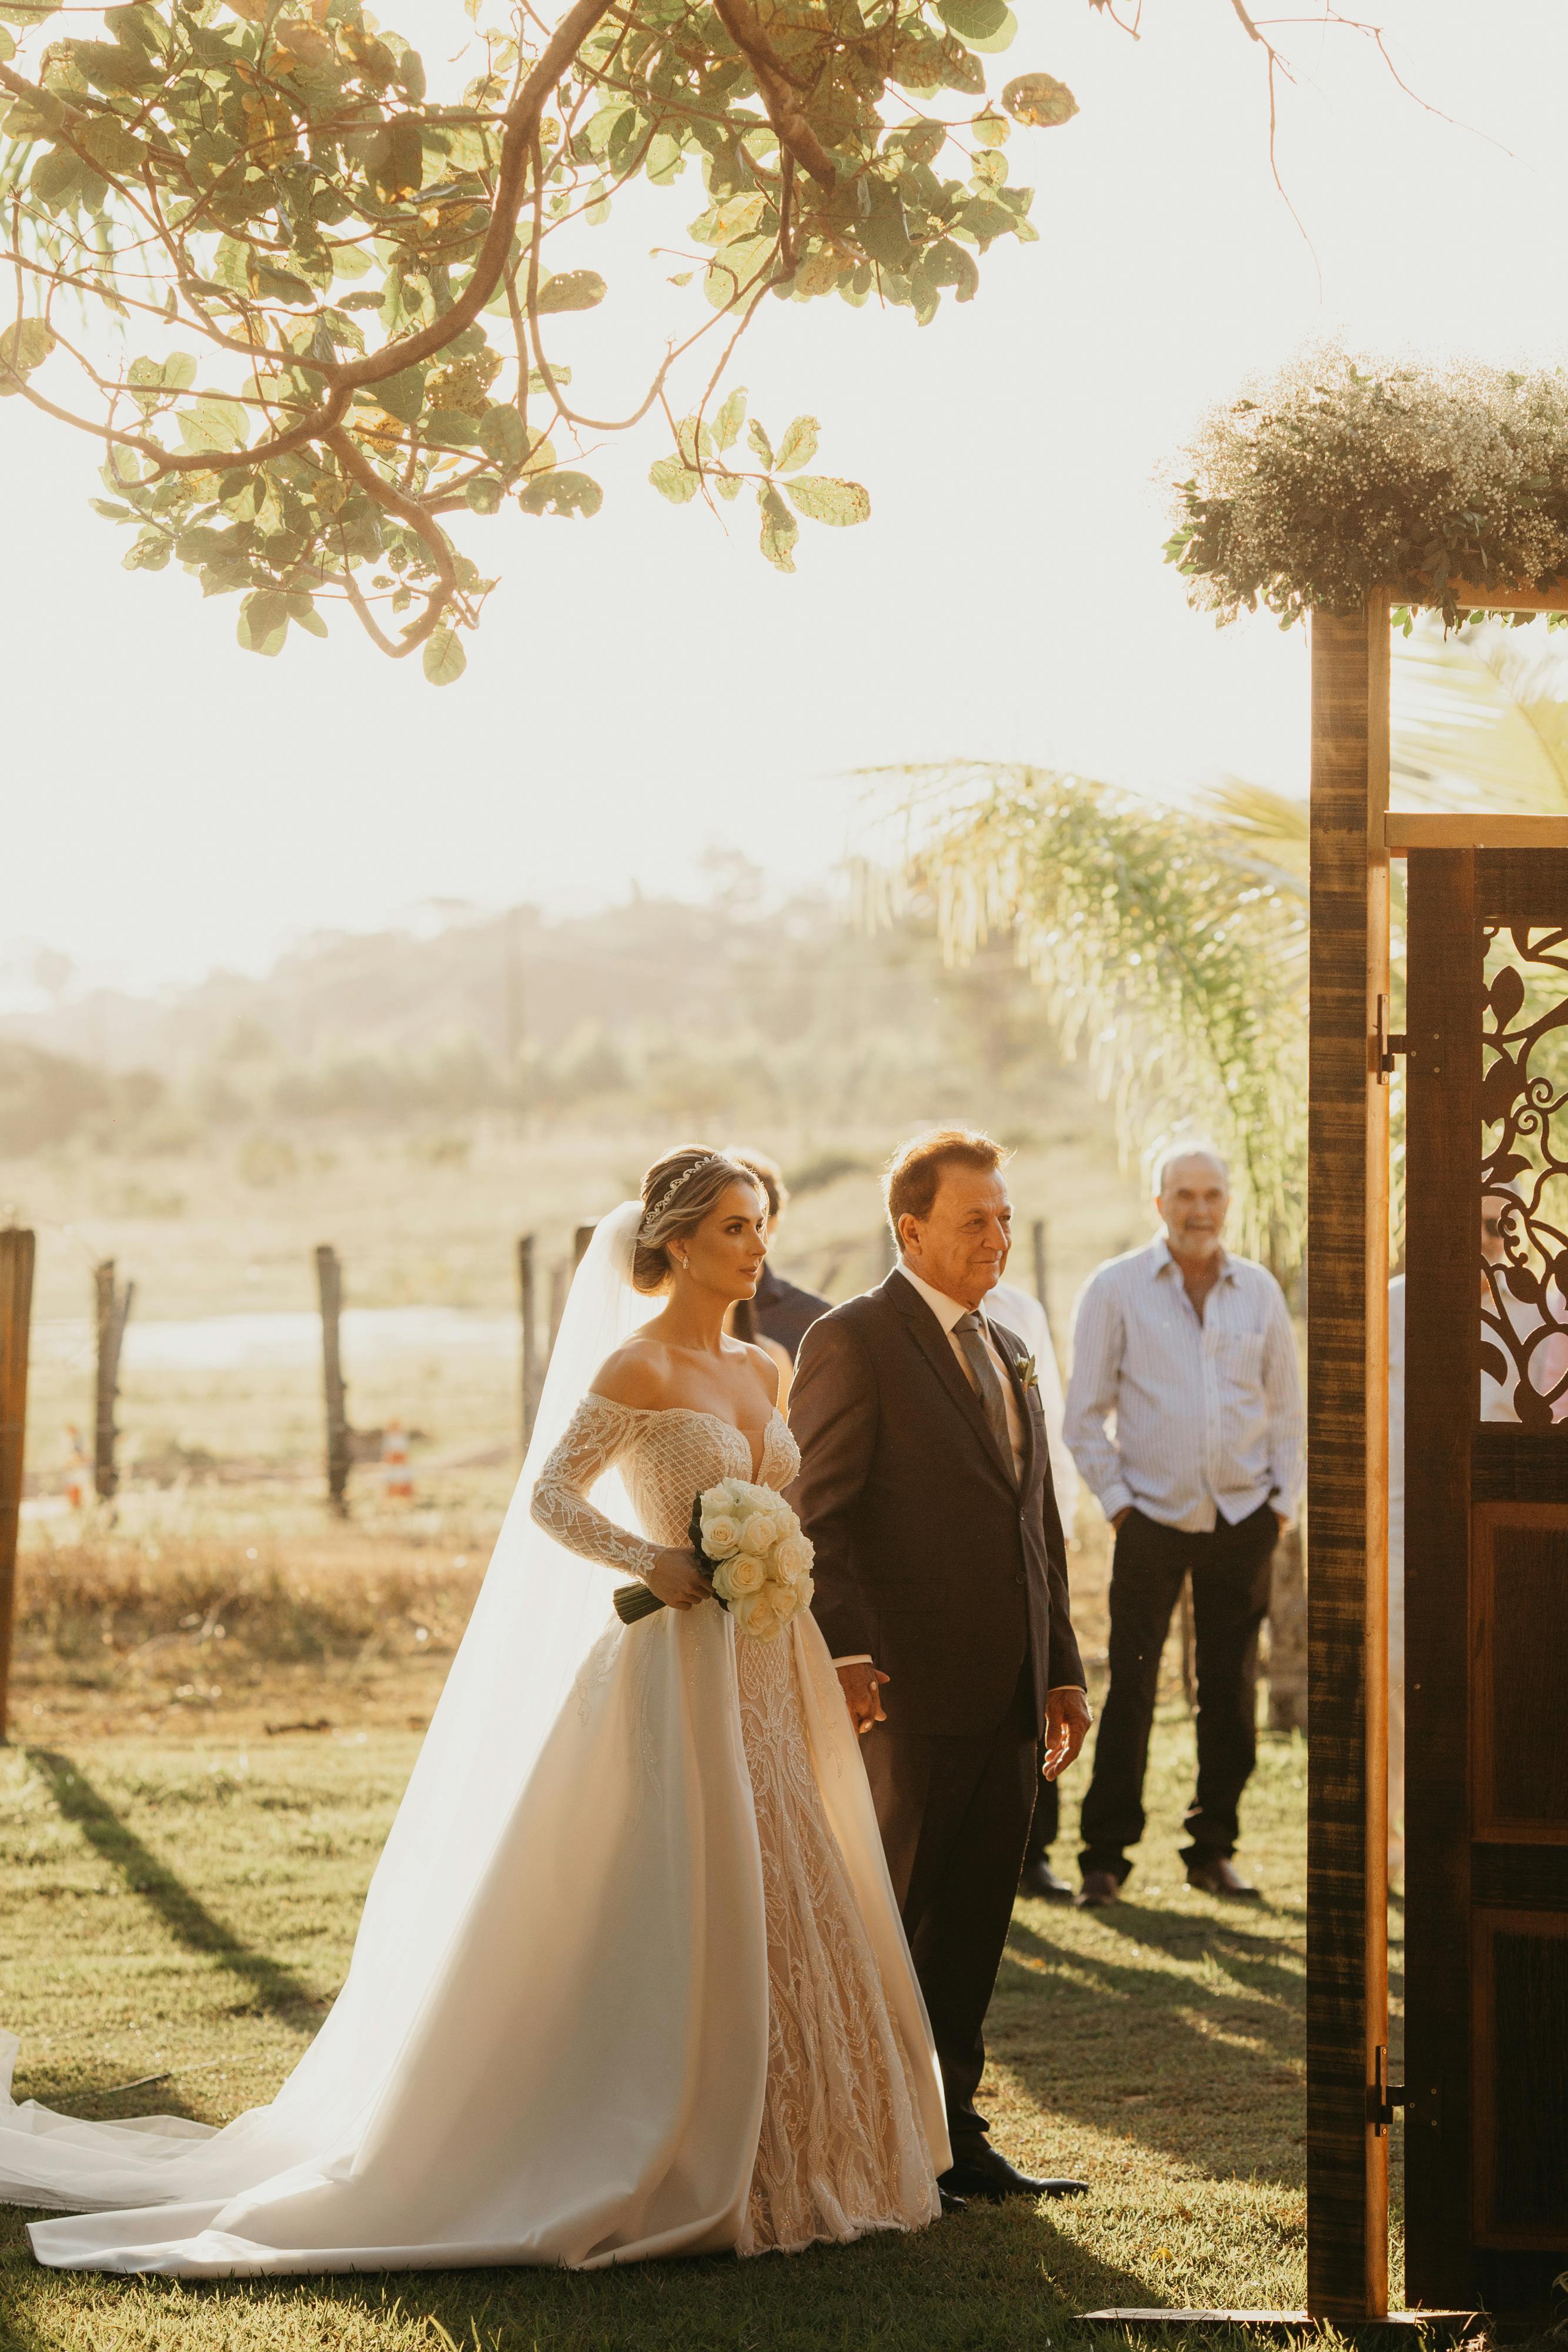 A bride and her father walking down the aisle | Source: Pexels